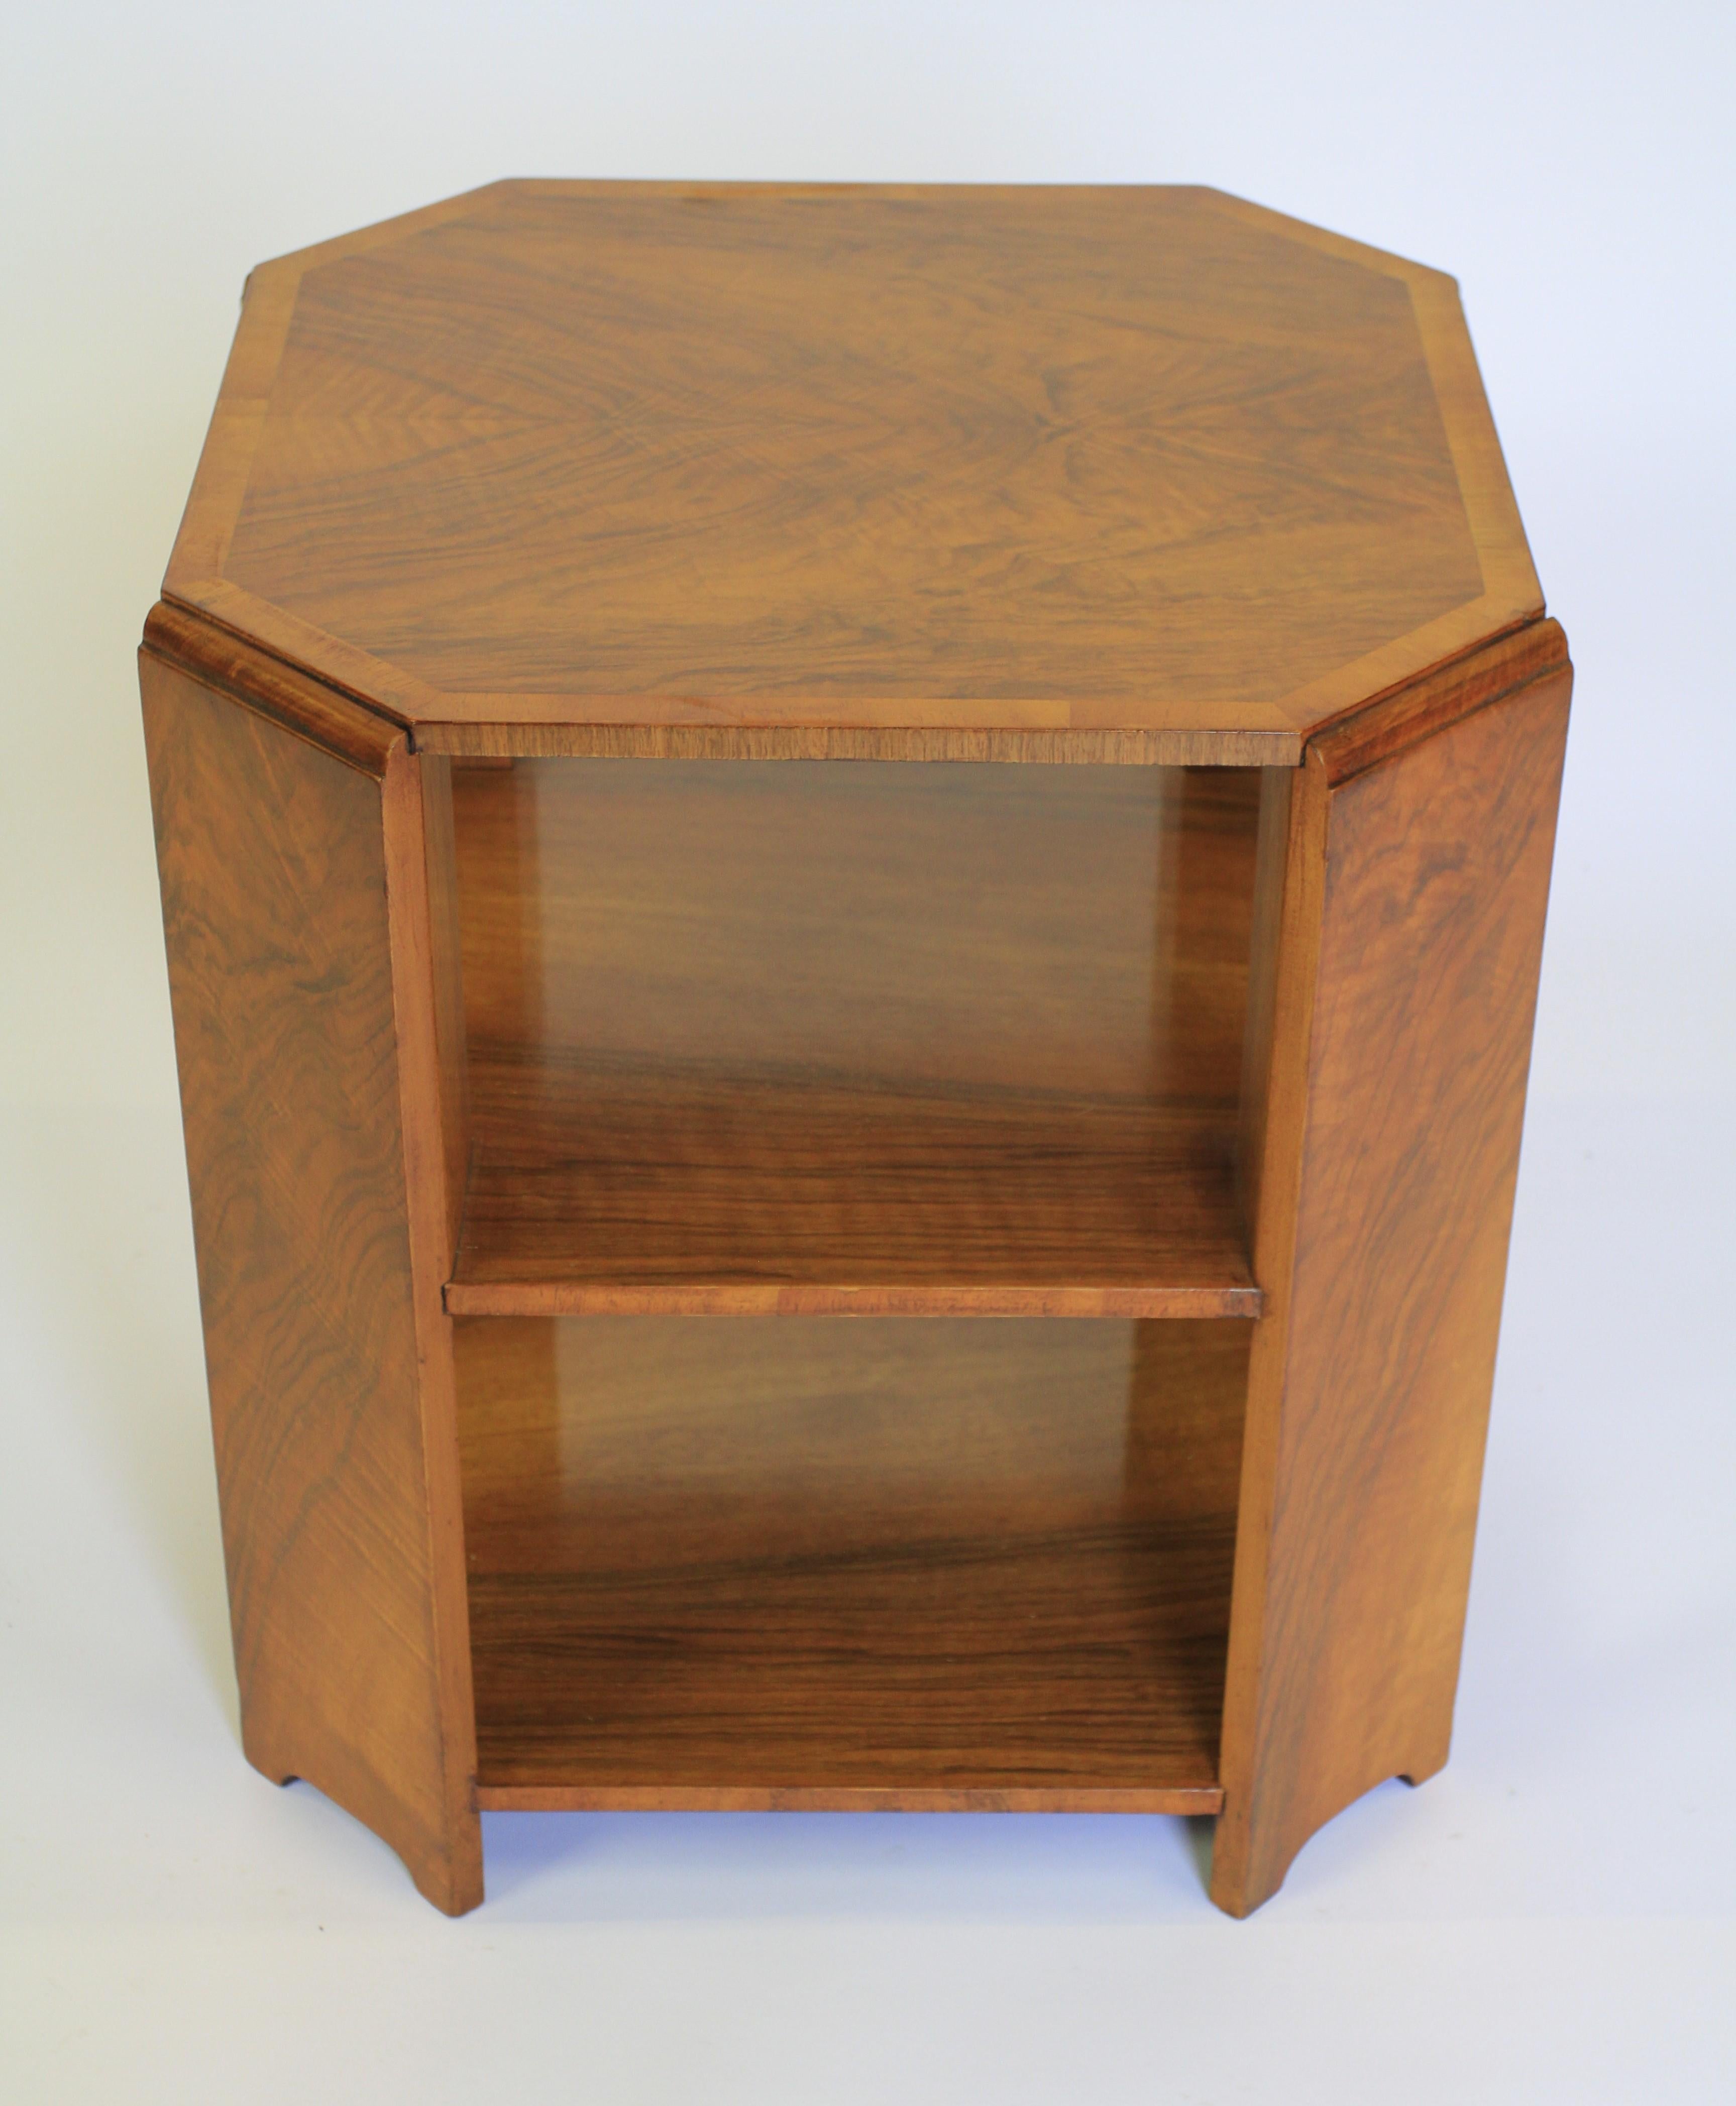 Art Deco Walnut 2 Tier Book Table circa 1930s
Top With book match veneer & cross banding

4 canted corner slab sides, with arch base

2 tier shelves to hold books
Recently Polished
Good Quality Table